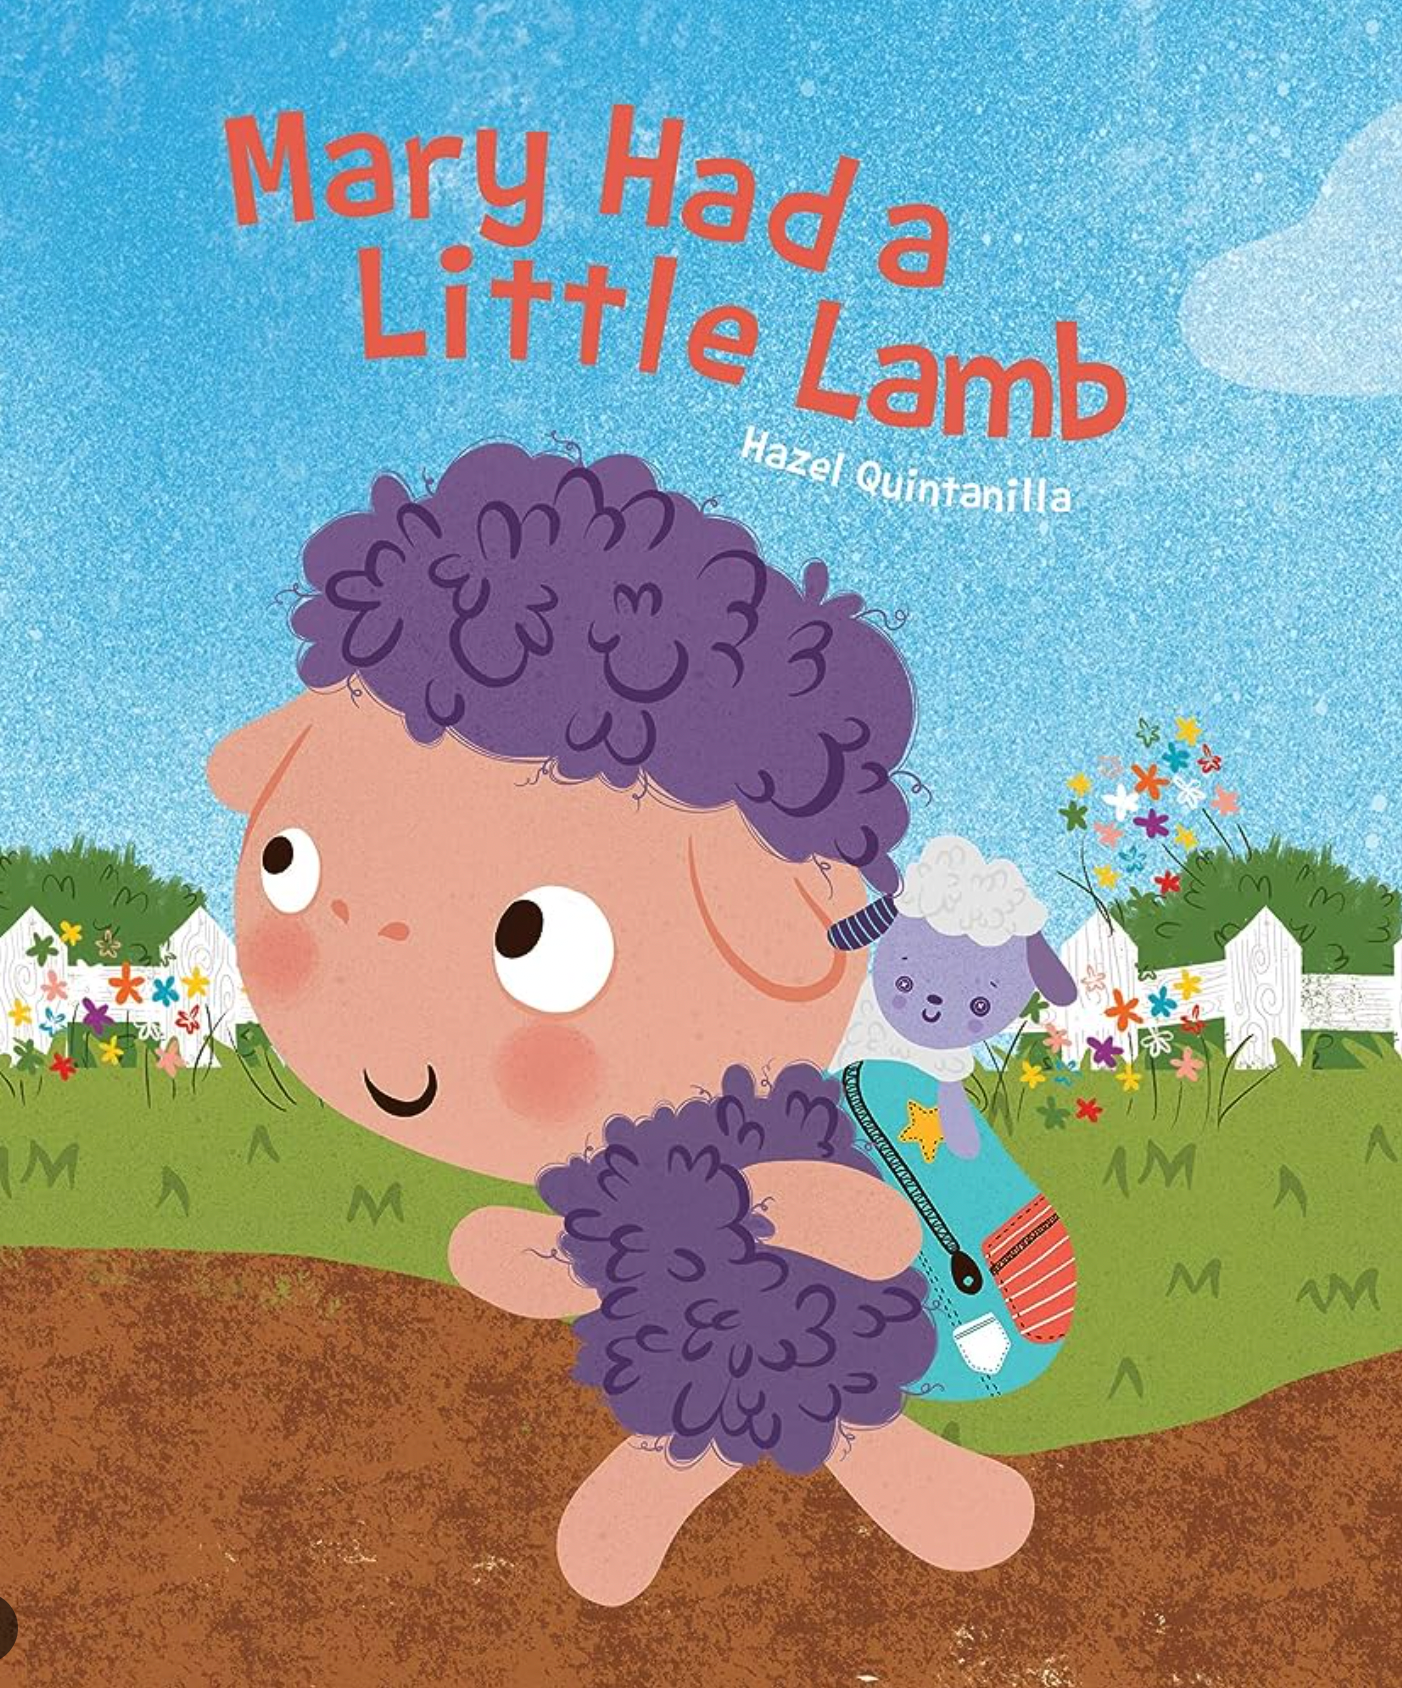 "Mary Had a Little Lamb" Book